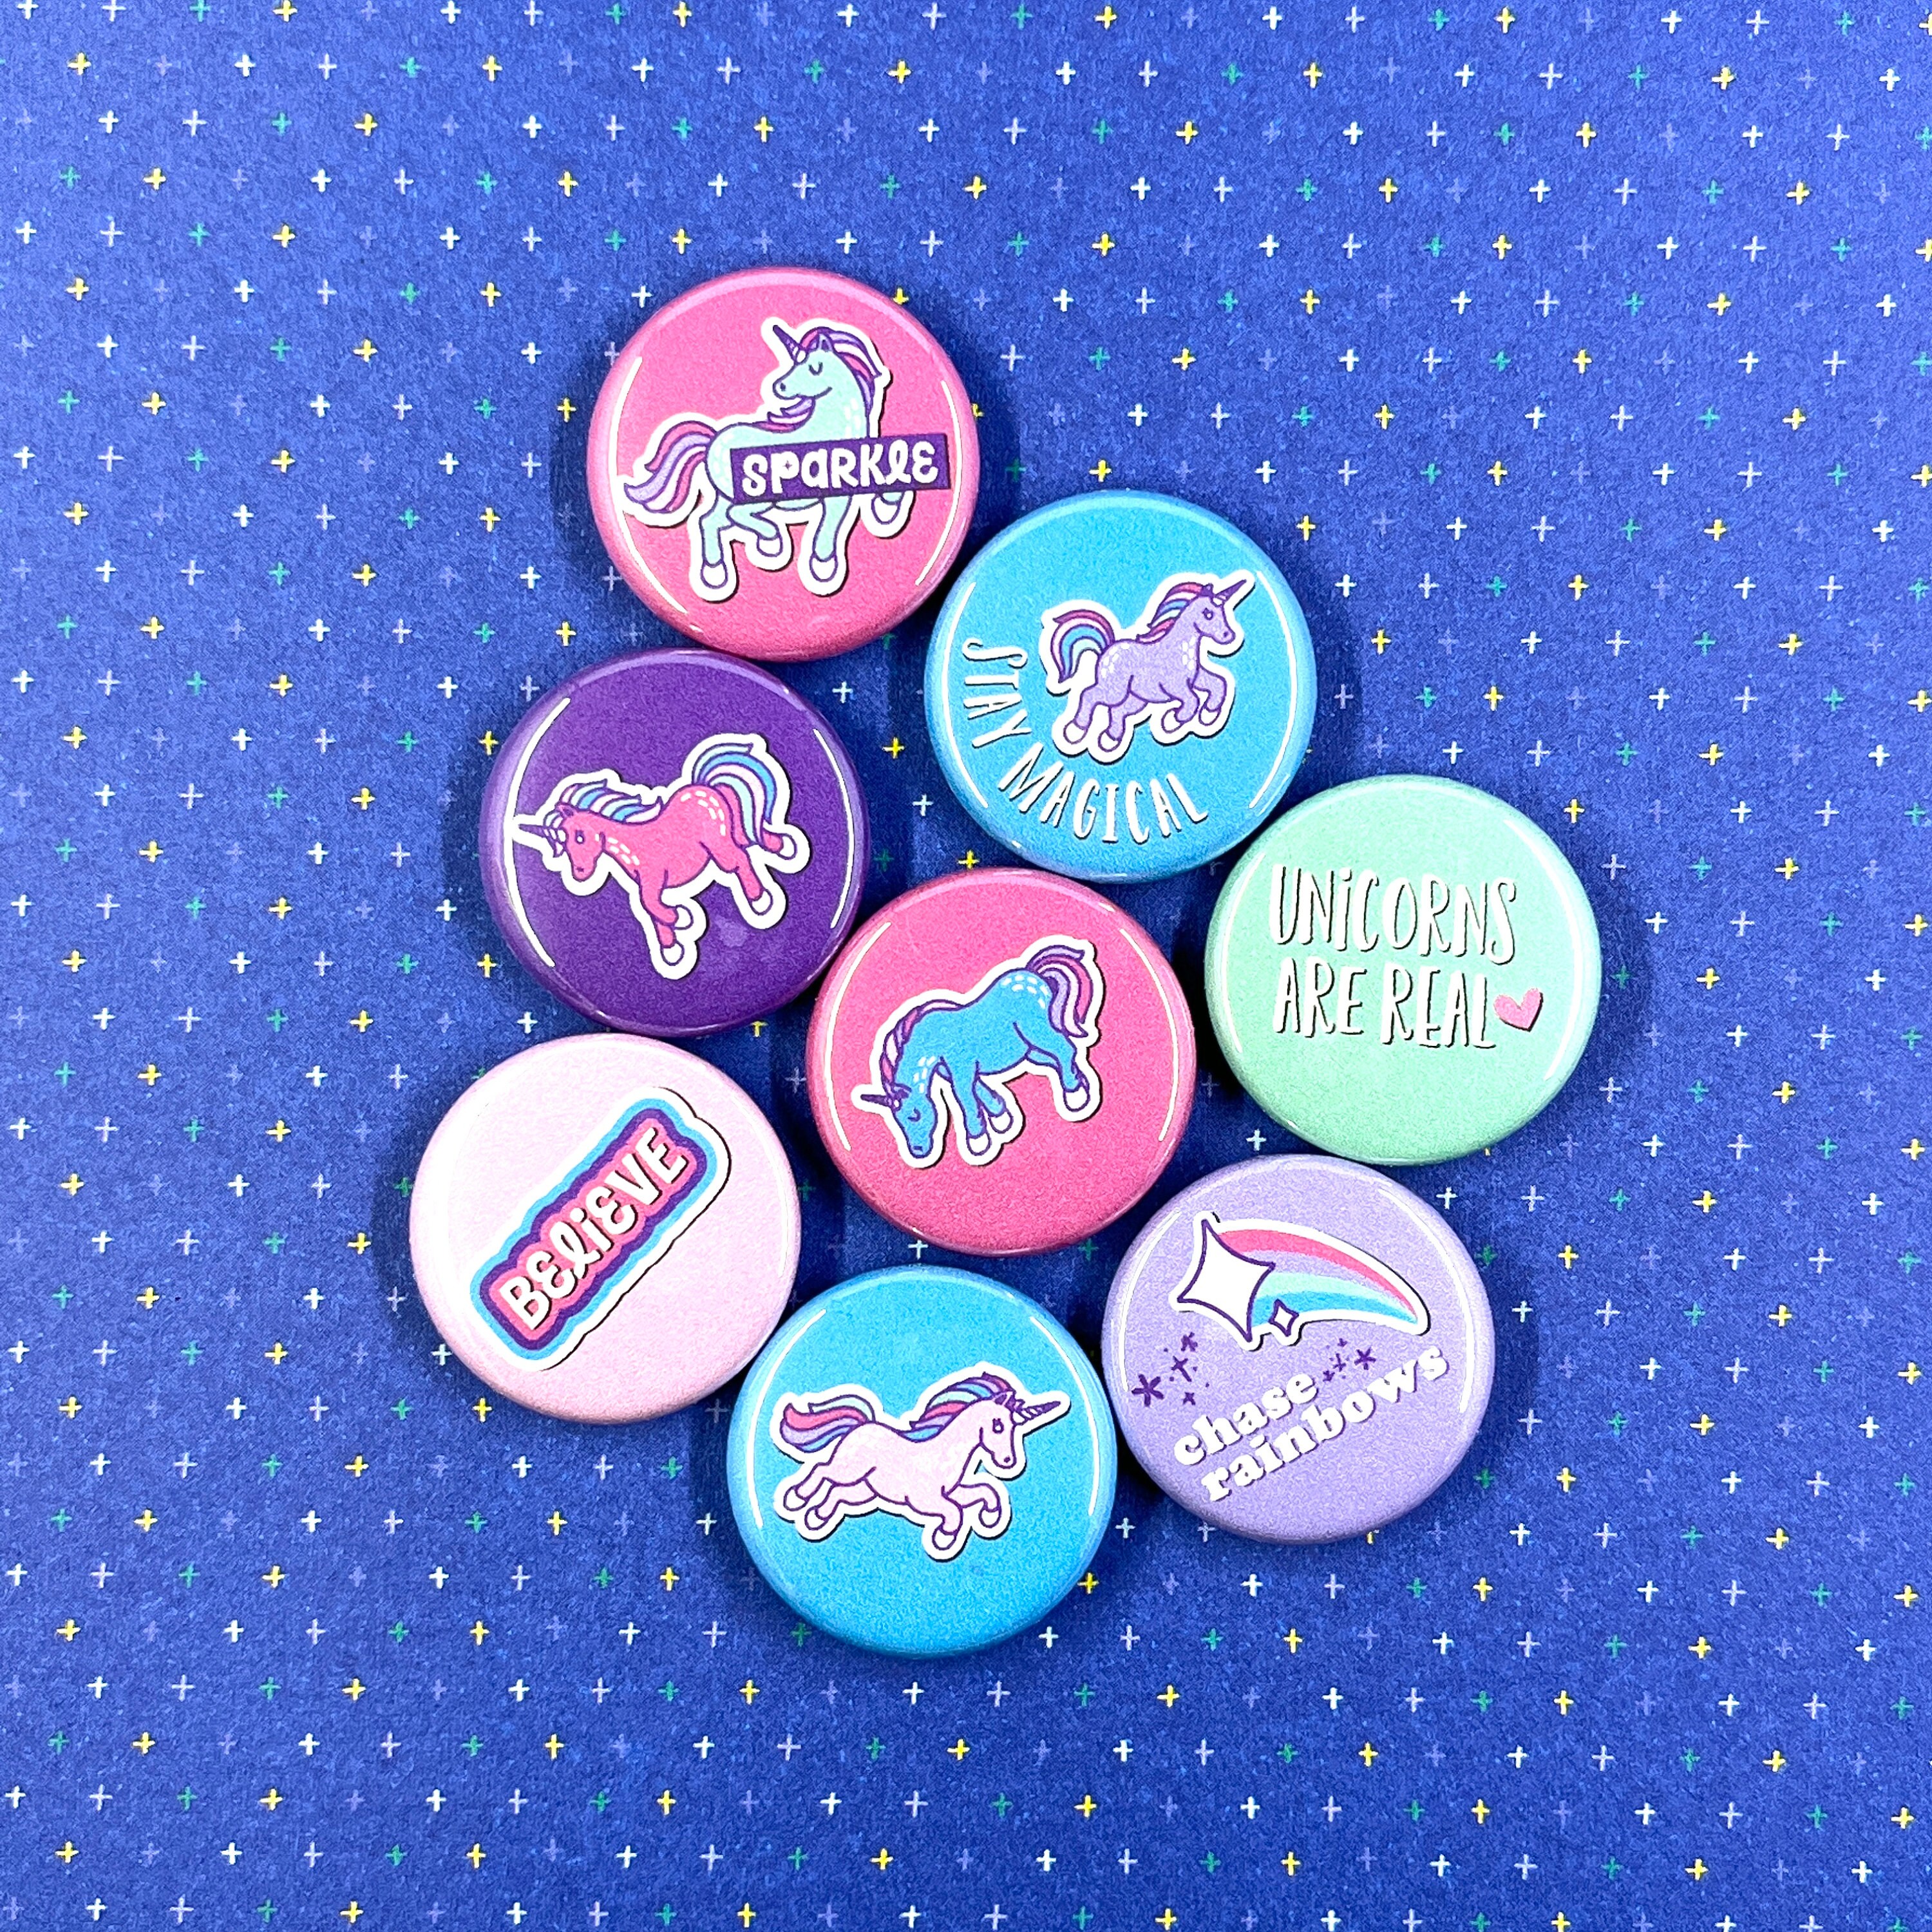 Mix & Match Button Pins Your Pick Cute Button Pin Gift 